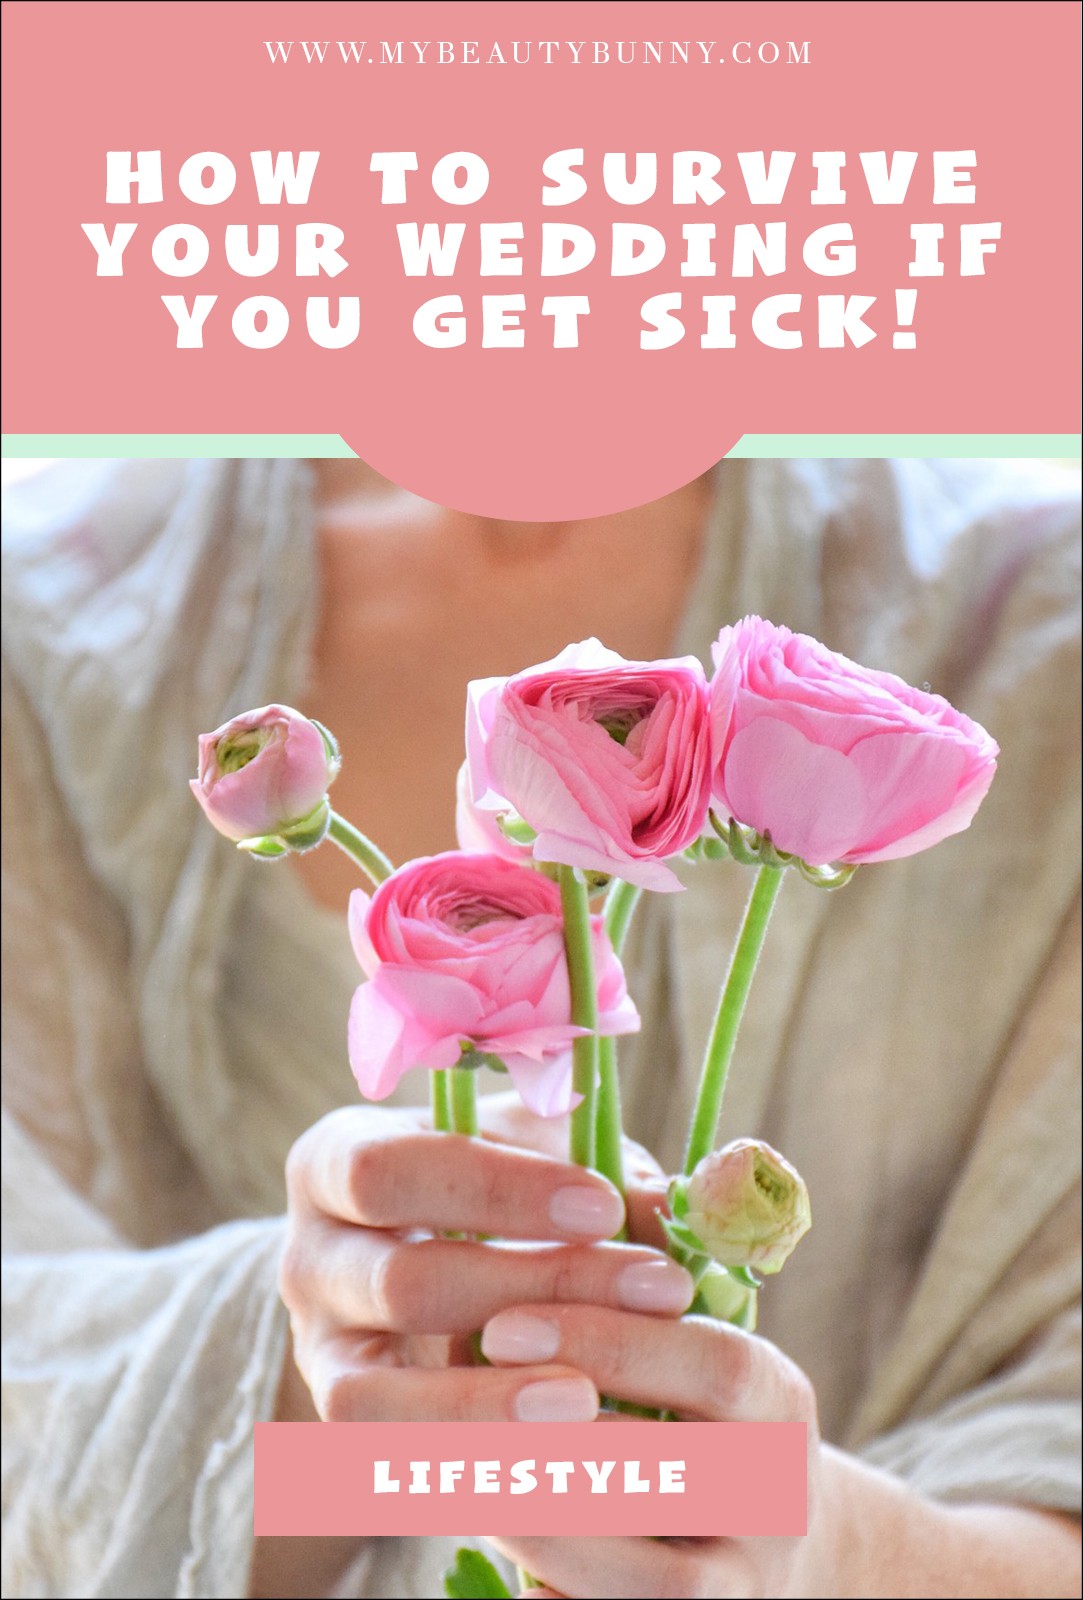 What to do if you get sick on your wedding day - a survival guide